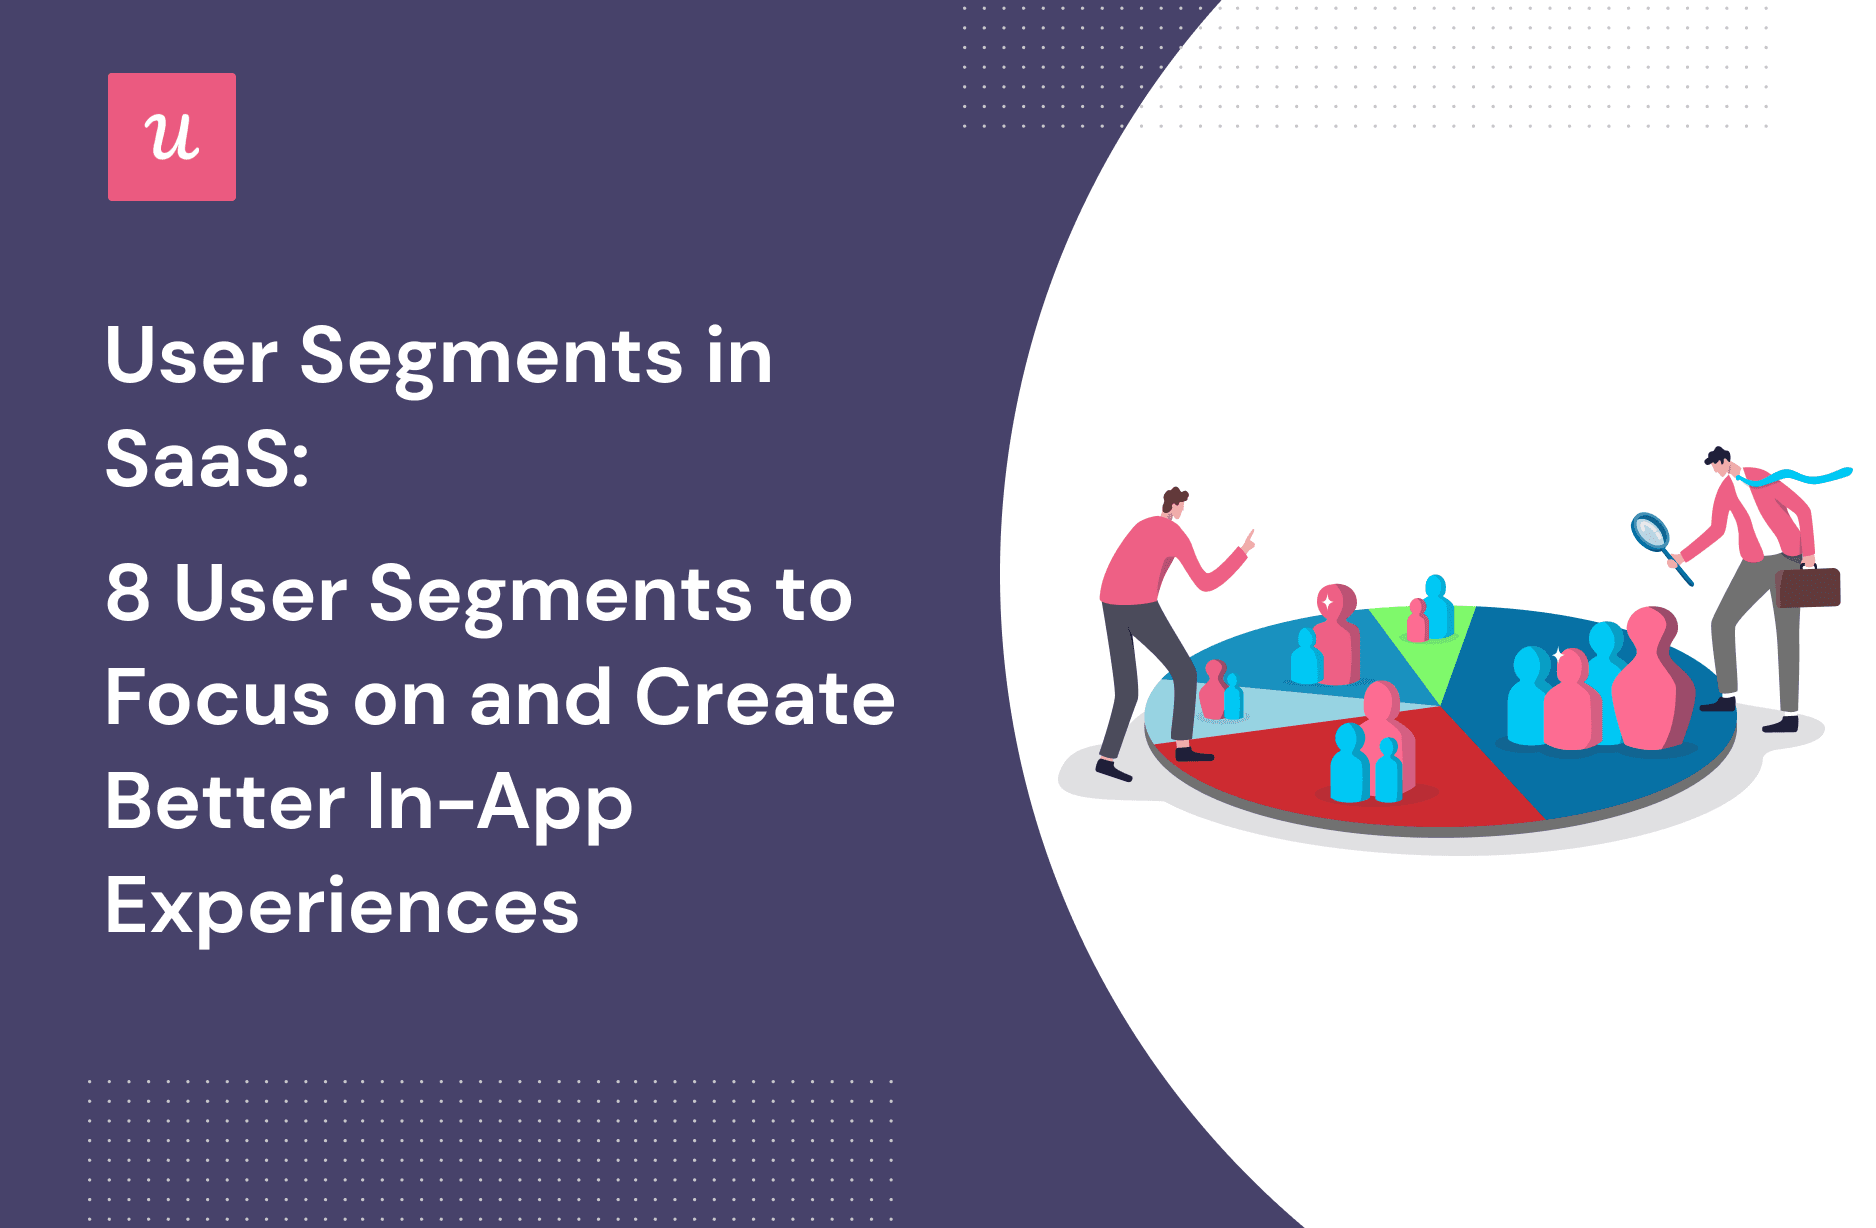 User-Segments-in-SaaS-8-User-Segments-To-Focus-on-and-Create-Better-In-App-Experiences